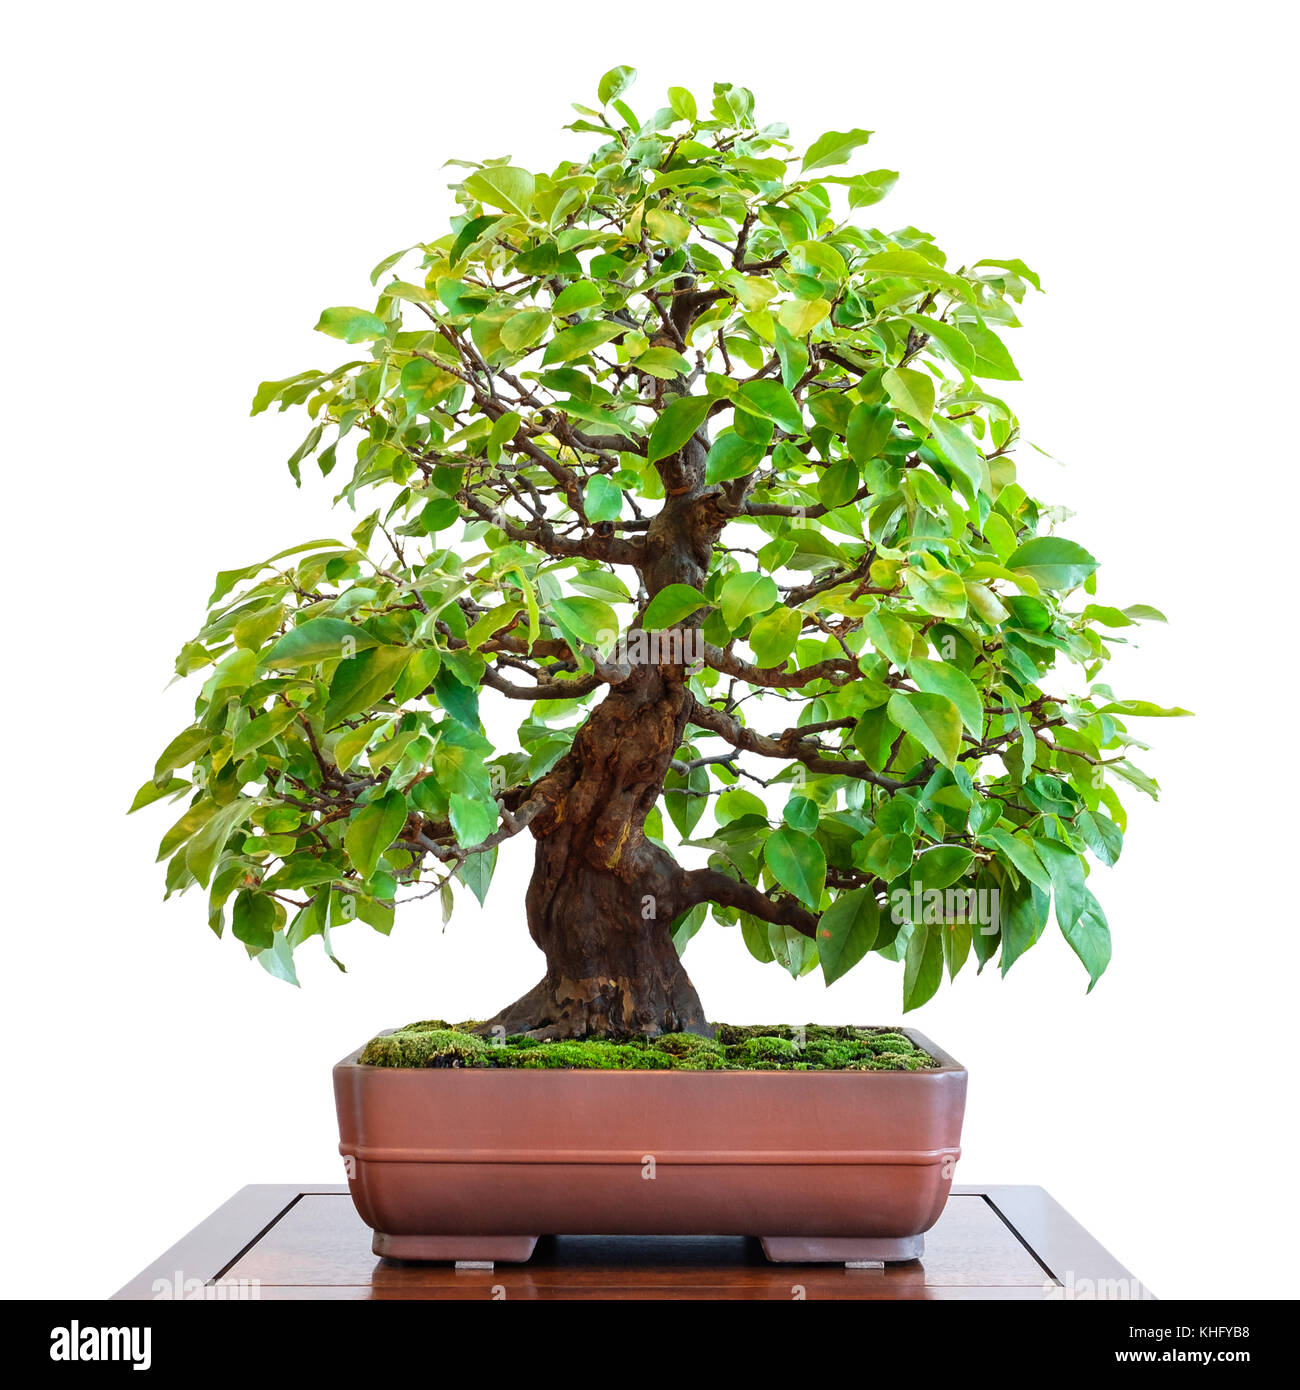 Old quince (Pseudocydonia sinensis) as bonsai tree with foliage Stock Photo